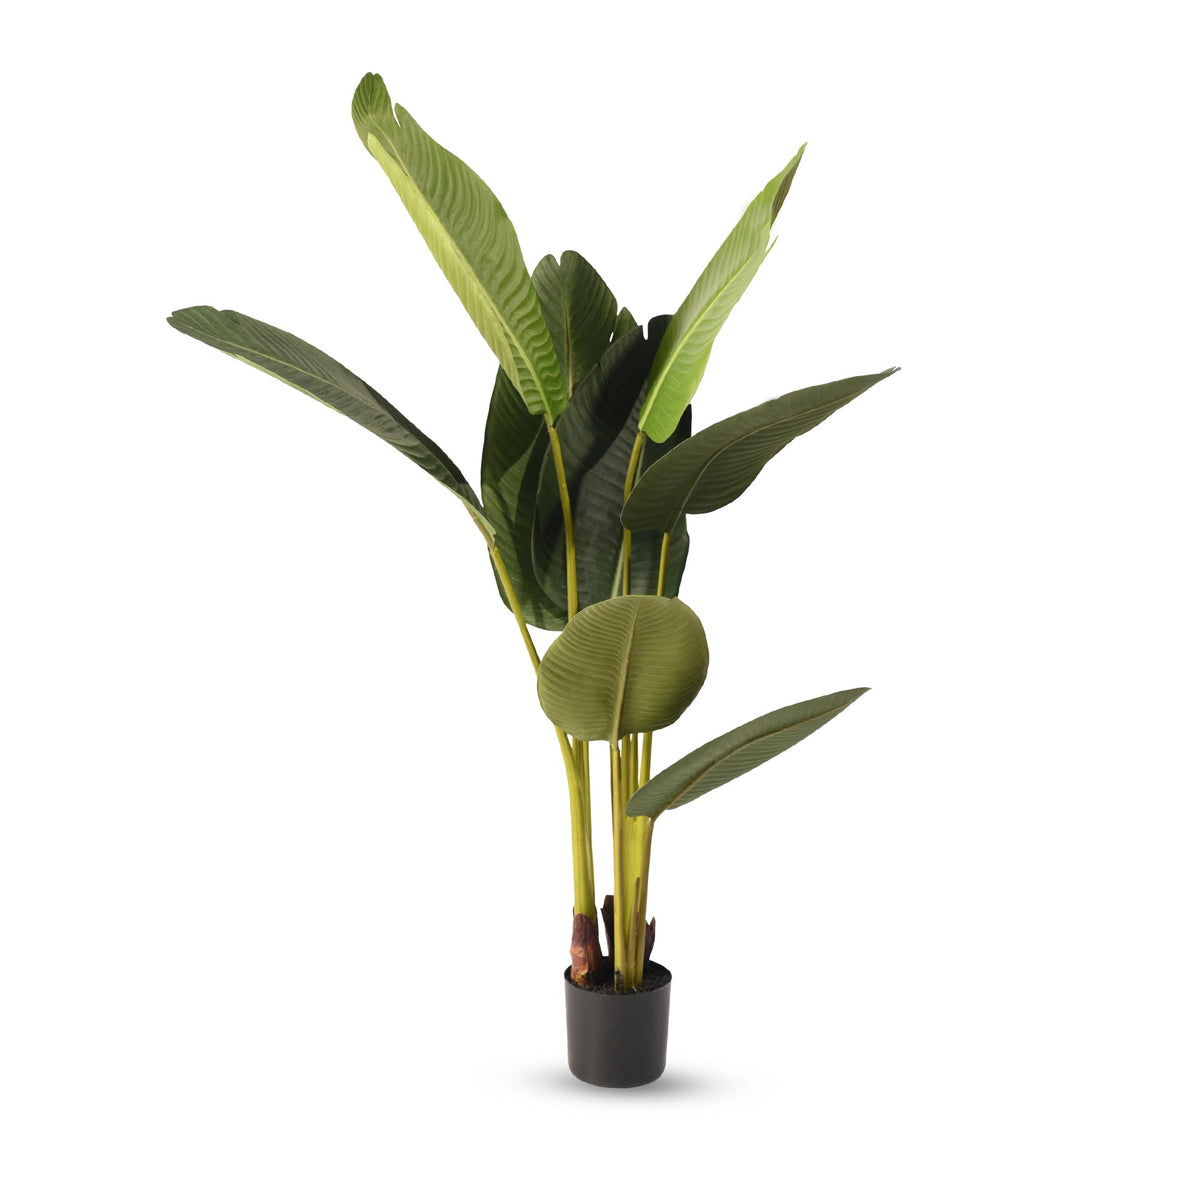 Kuber Industries Banana Leaf Artificial Plant | 117 CM Tree with Flexible Trunks | 8 Leaves Greenery Plant with Pot | Plant for Home Decor | Plastic | FH-M1208 | Green